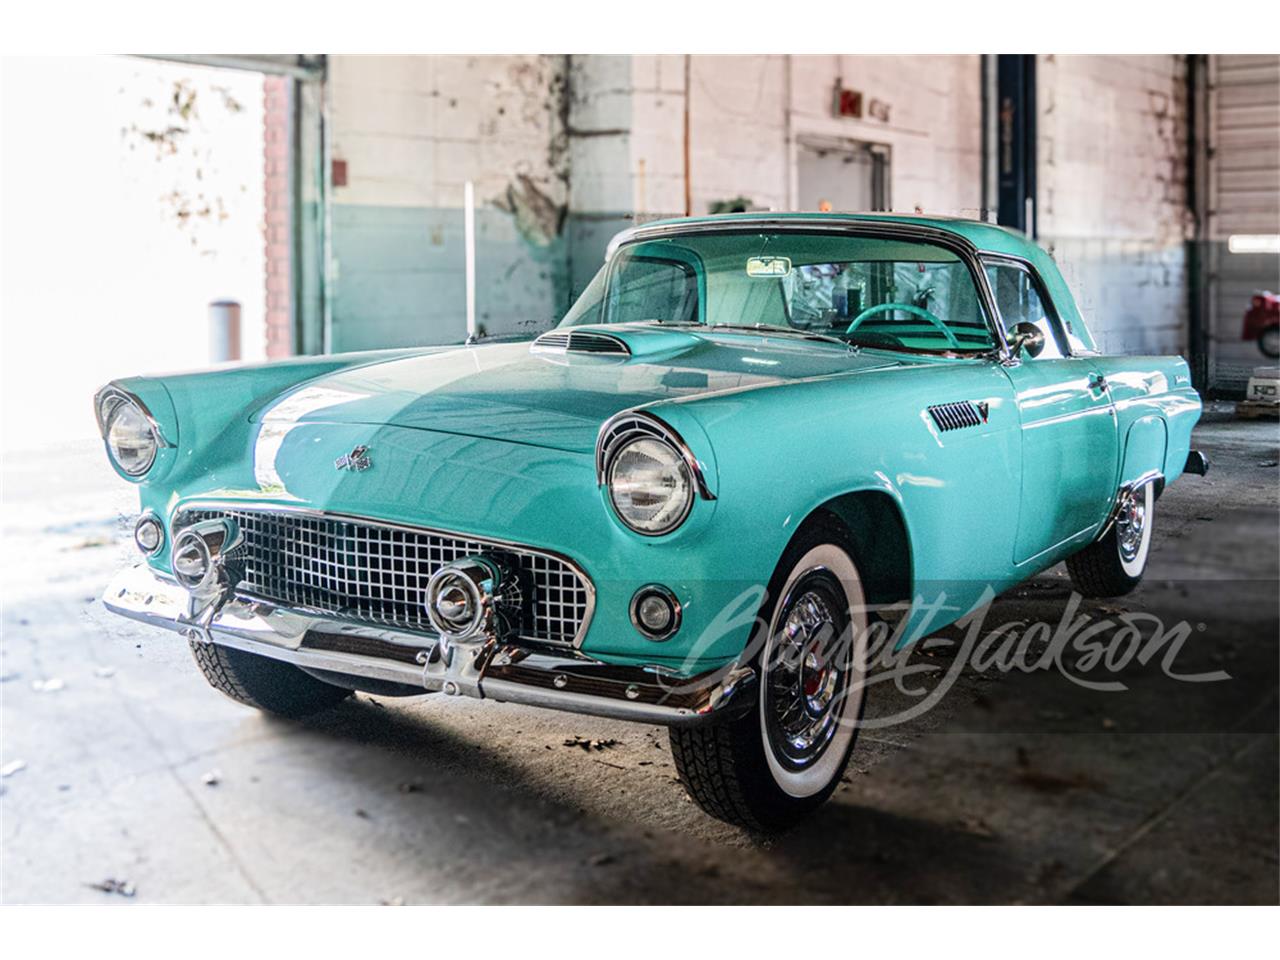 For Sale at Auction: 1955 Ford Thunderbird in Scottsdale, Arizona for sale in Scottsdale, AZ